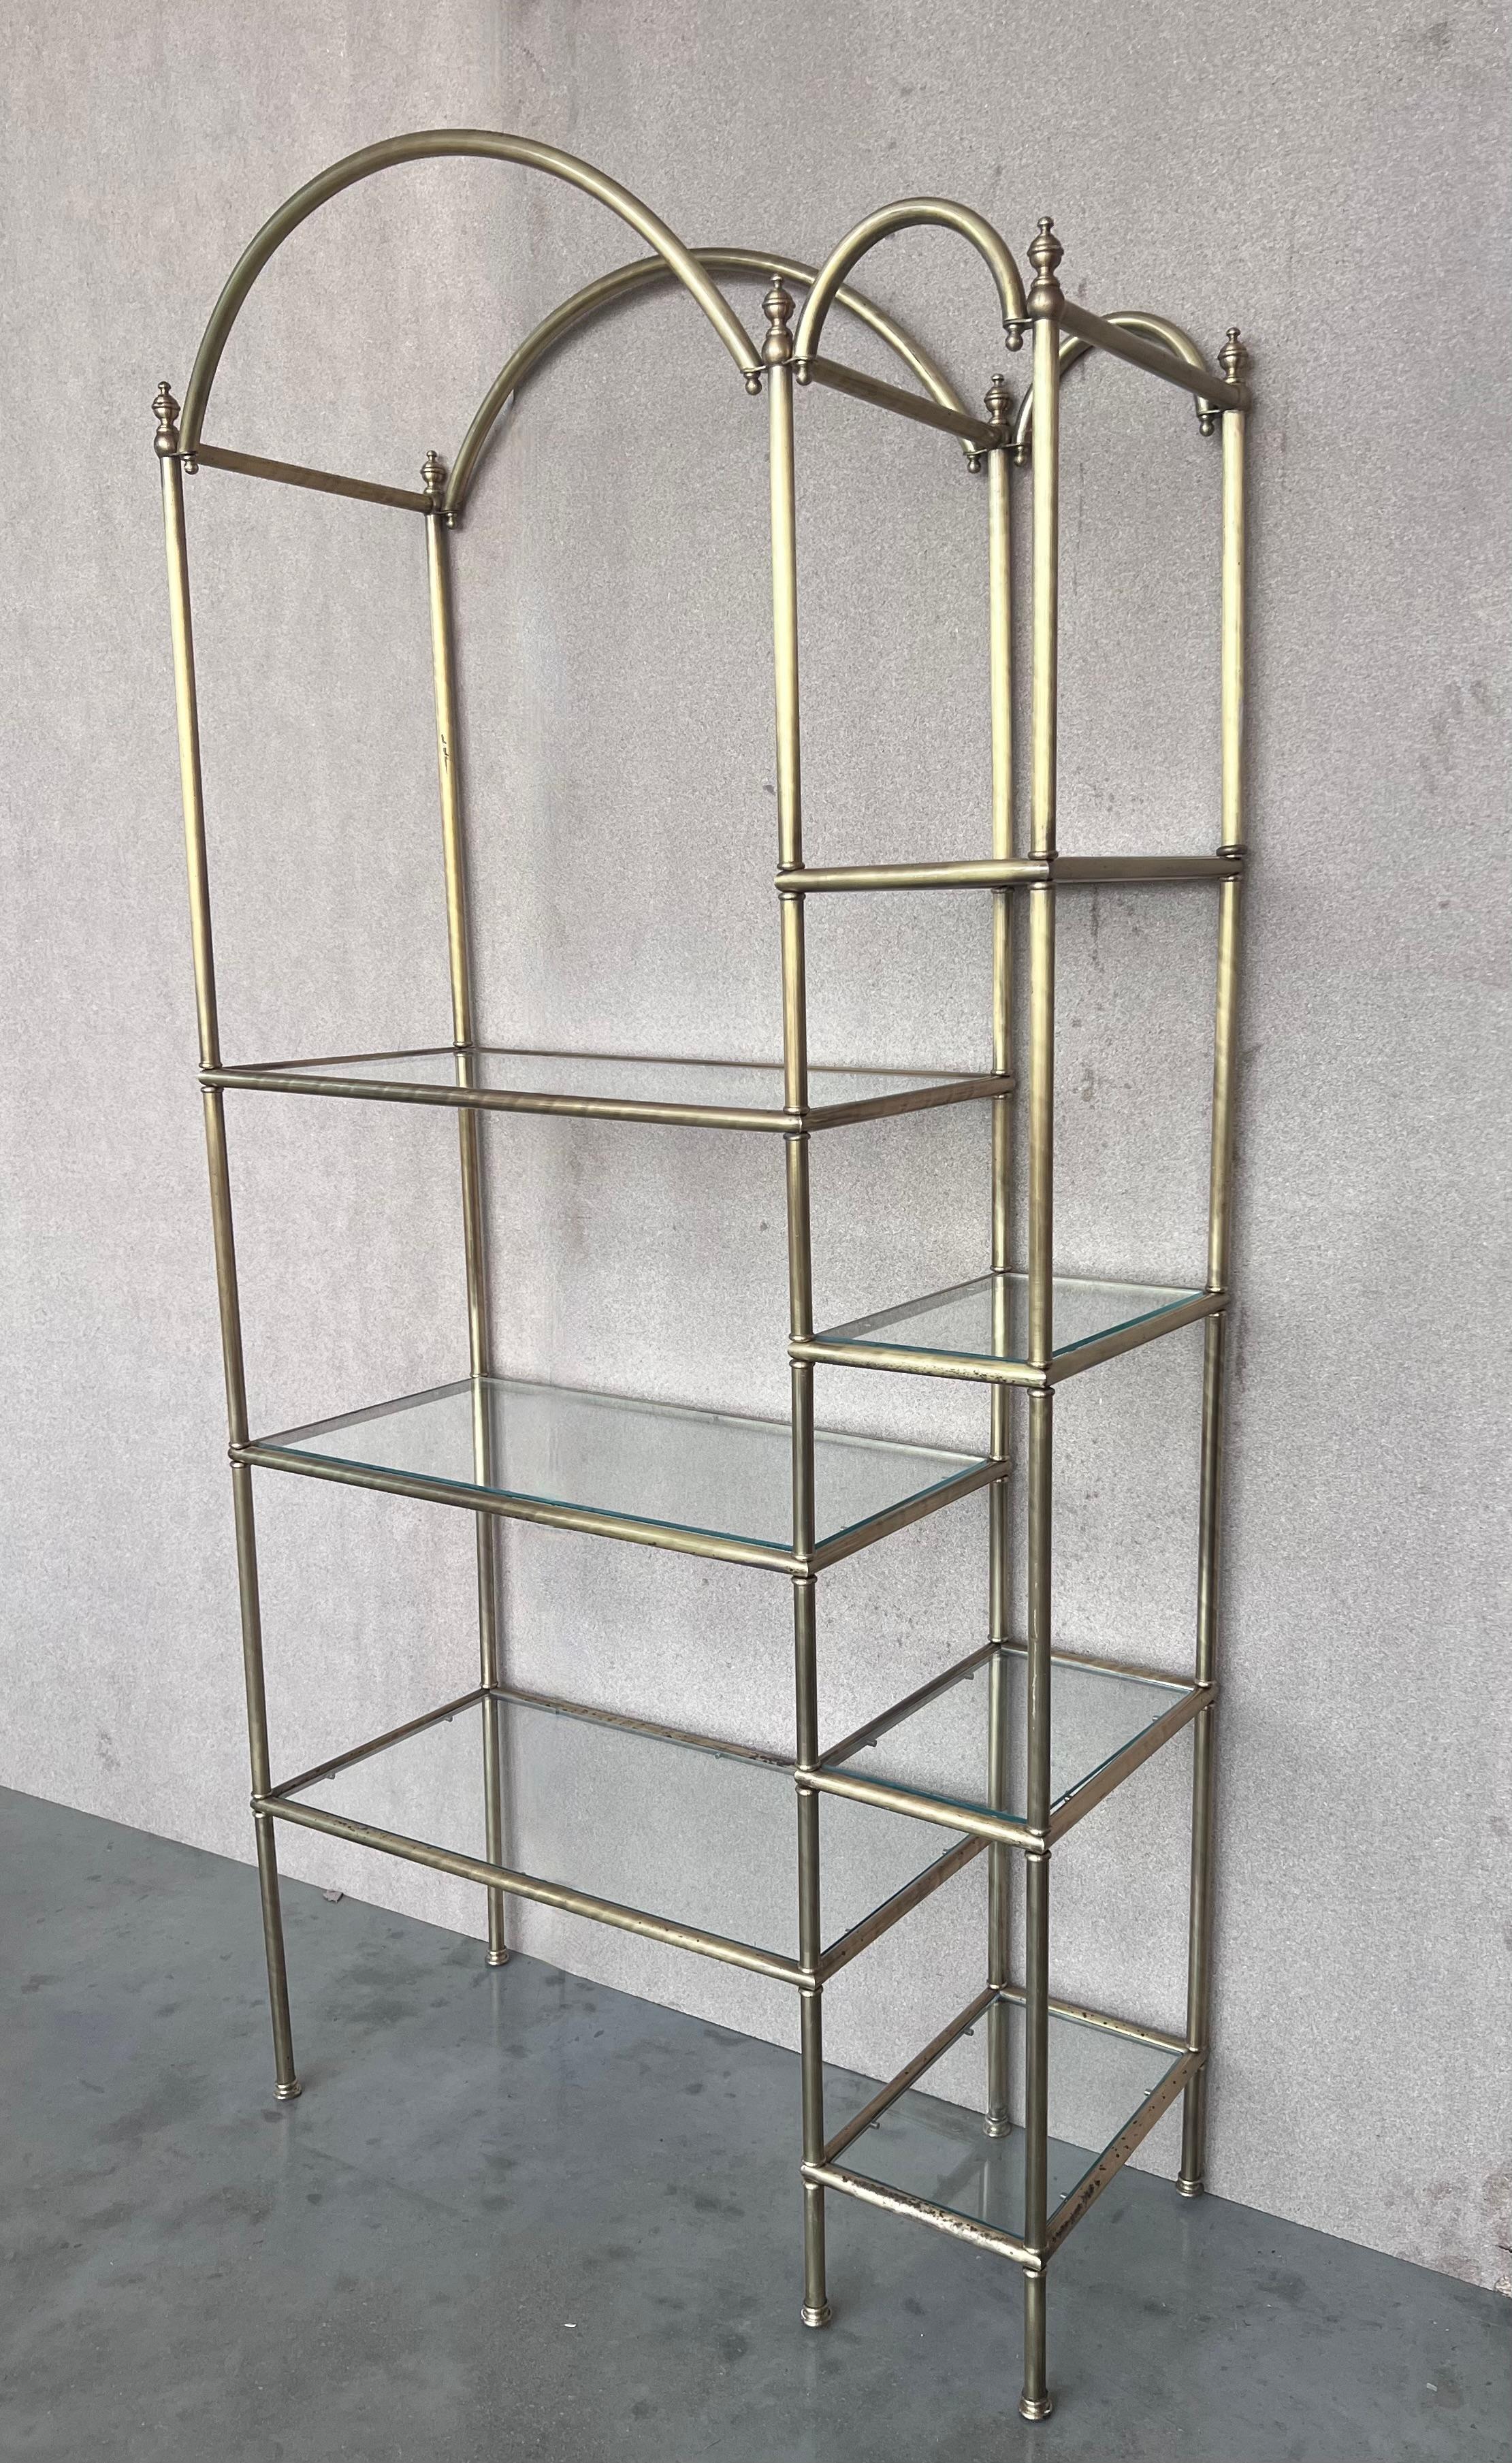 Vintage arched brass shelf shelves étagères. Chrome has been polished. Glasses are originals. 

The width is 29.92in + 9.44in 

.